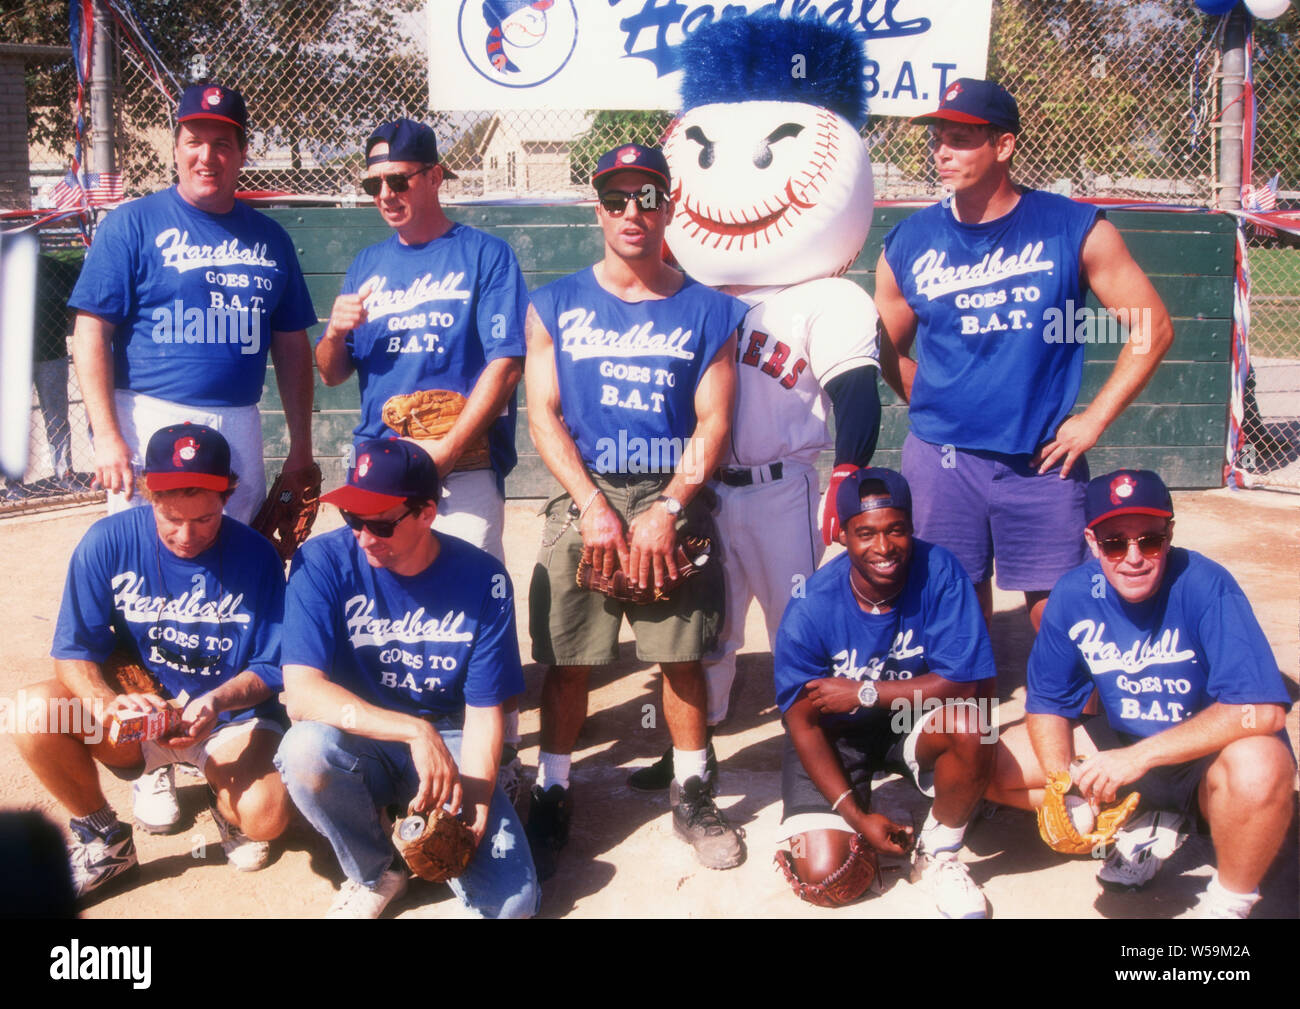 Los Angeles, California, USA 12th October 1994 Actor Mike Starr, actor Dann Florek, Comedian/actor Joe Rogan, actor Chris Browning, actor Bruce Greenwood, actor Steve Hytner and actor Phill Lewis attend Hardball Goes To B.A.T. baseball game on October 12, 1994 in Los Angeles, California, USA. Photo by Barry King/Alamy Stock Photo Stock Photo